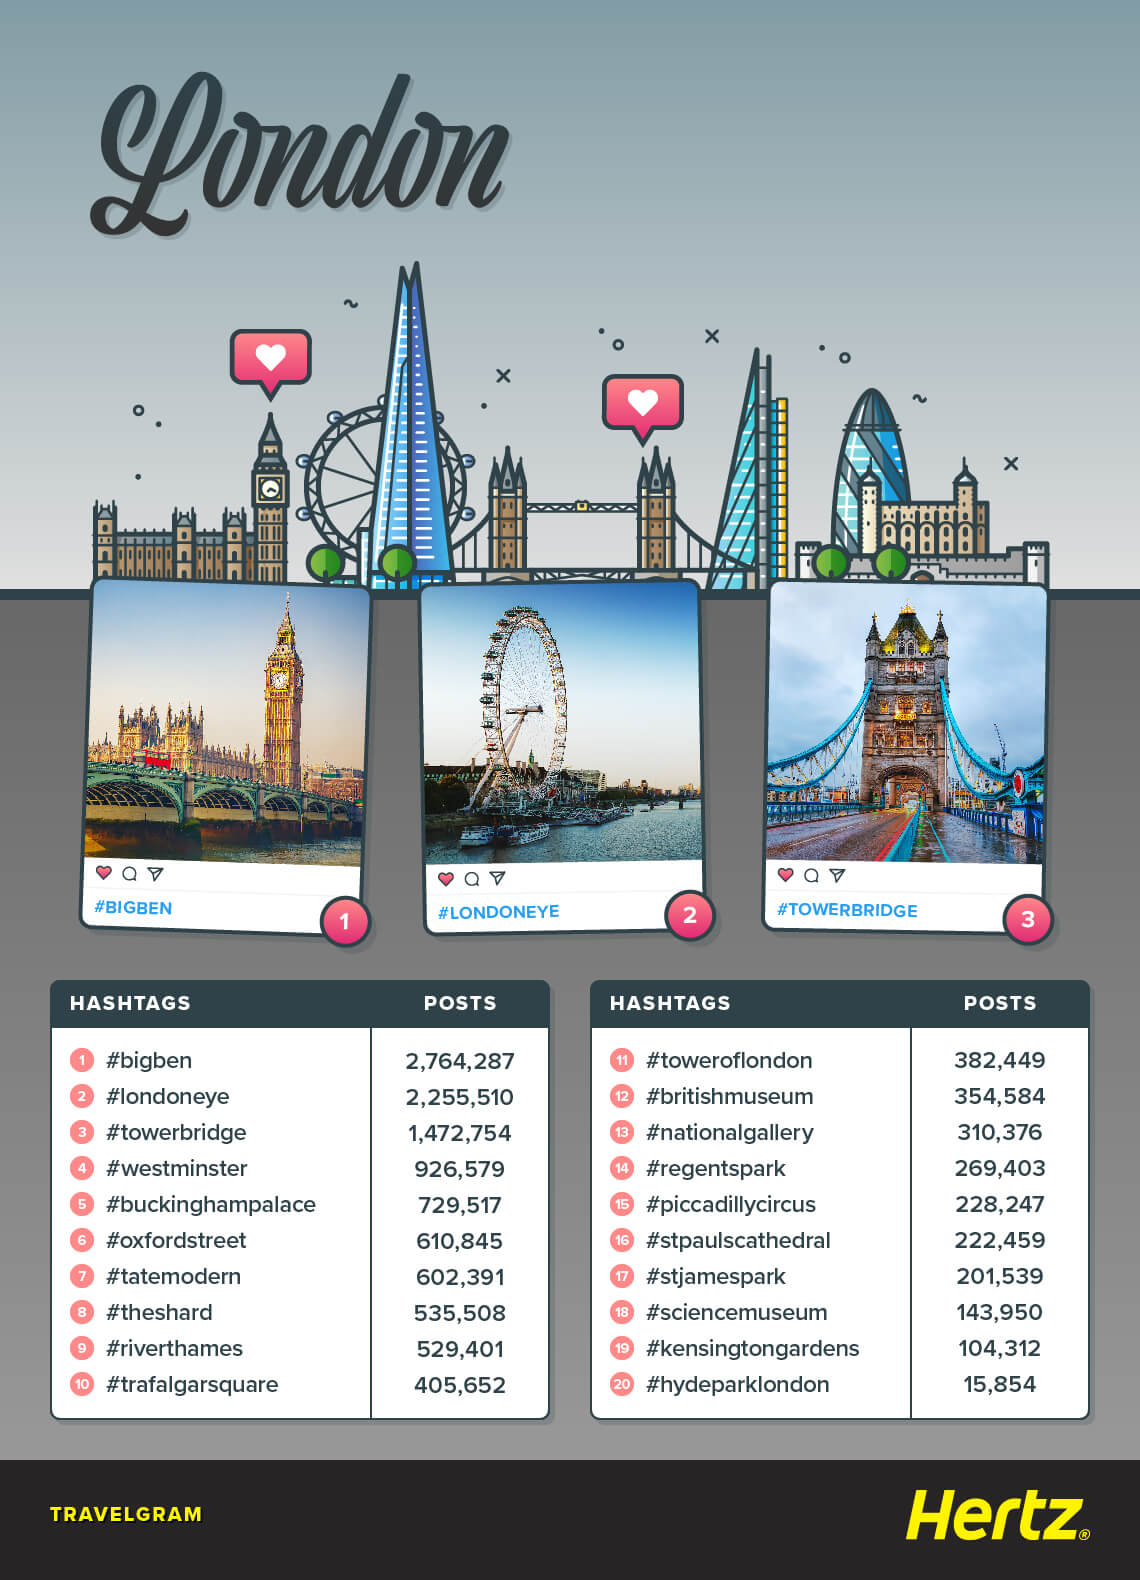 Overview of London's attractions